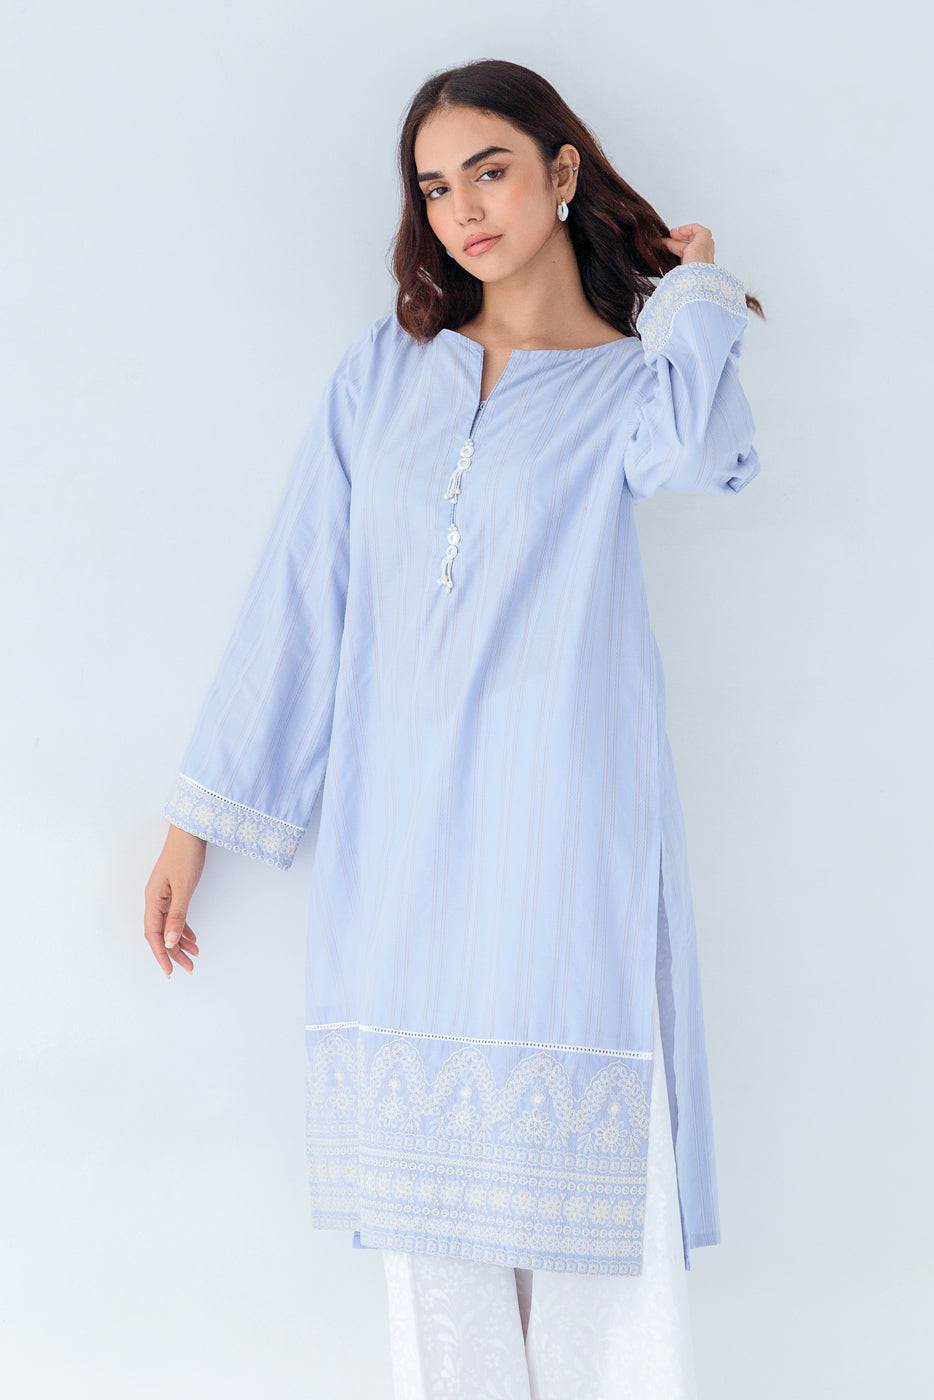 EMBROIDERED JACQUARD SHIRT (PRET) - BEECHTREE